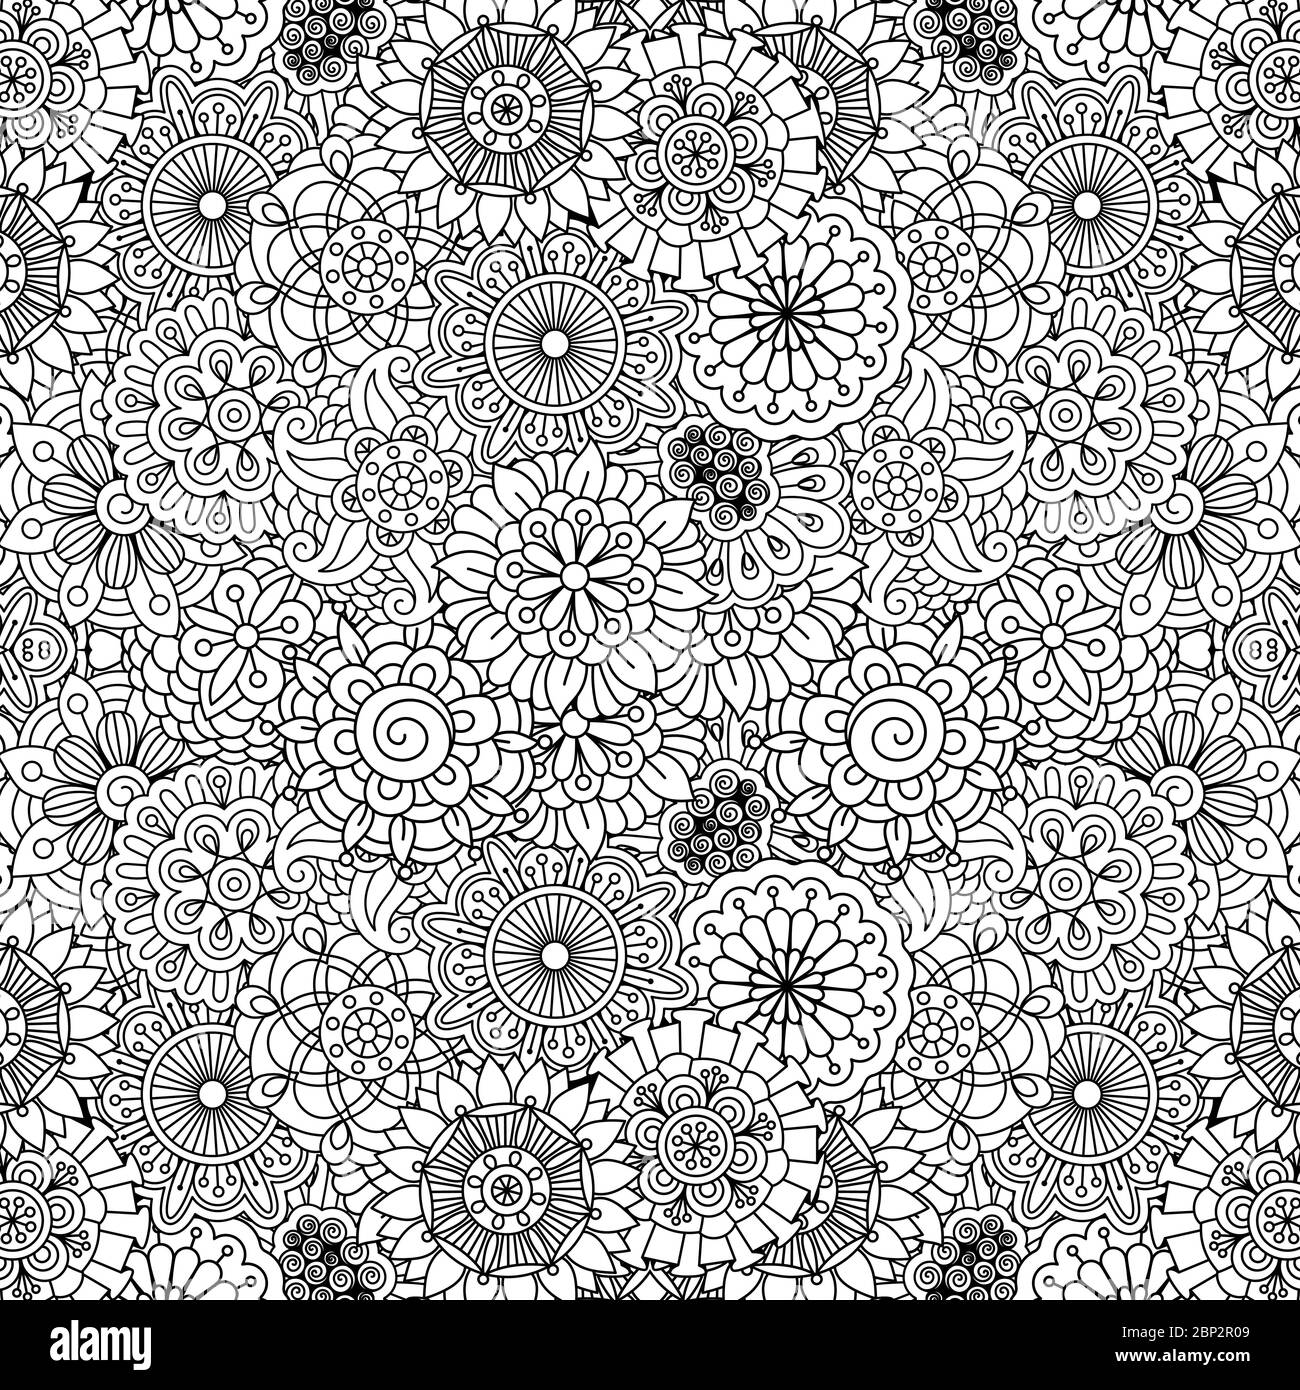 Floral ornamental black and white linear pattern. Vector decorative background with round, mandala like flowers Stock Vector